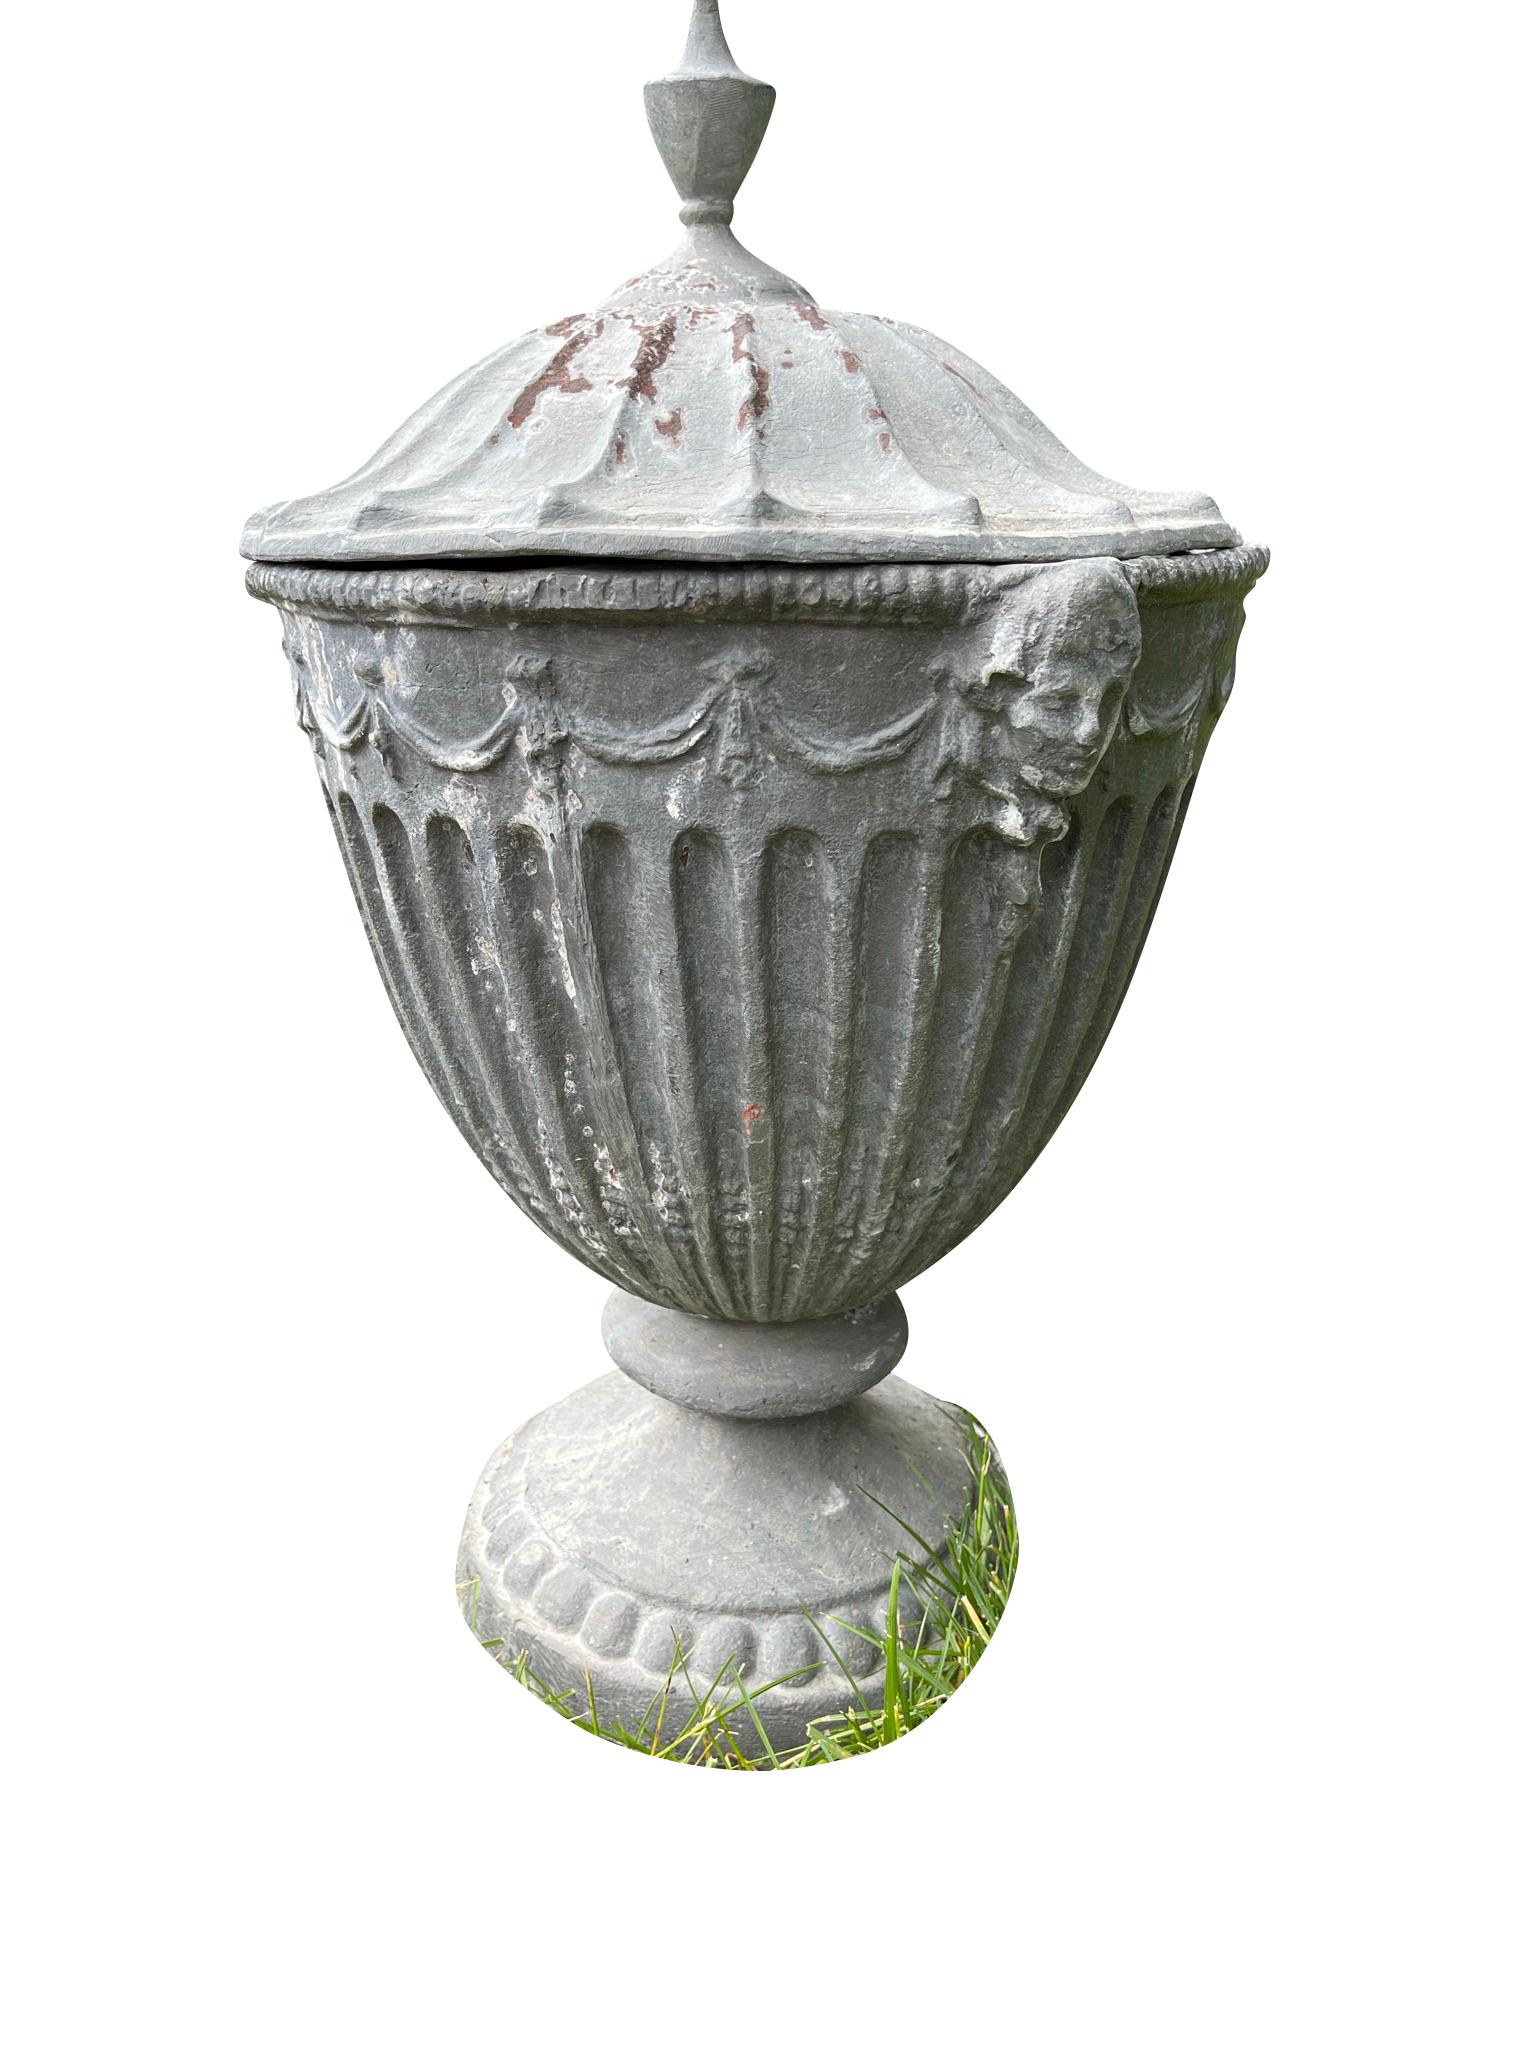 Regency 19th Century English Classical Pair of Lead Garden Urns with Covers Grey  For Sale